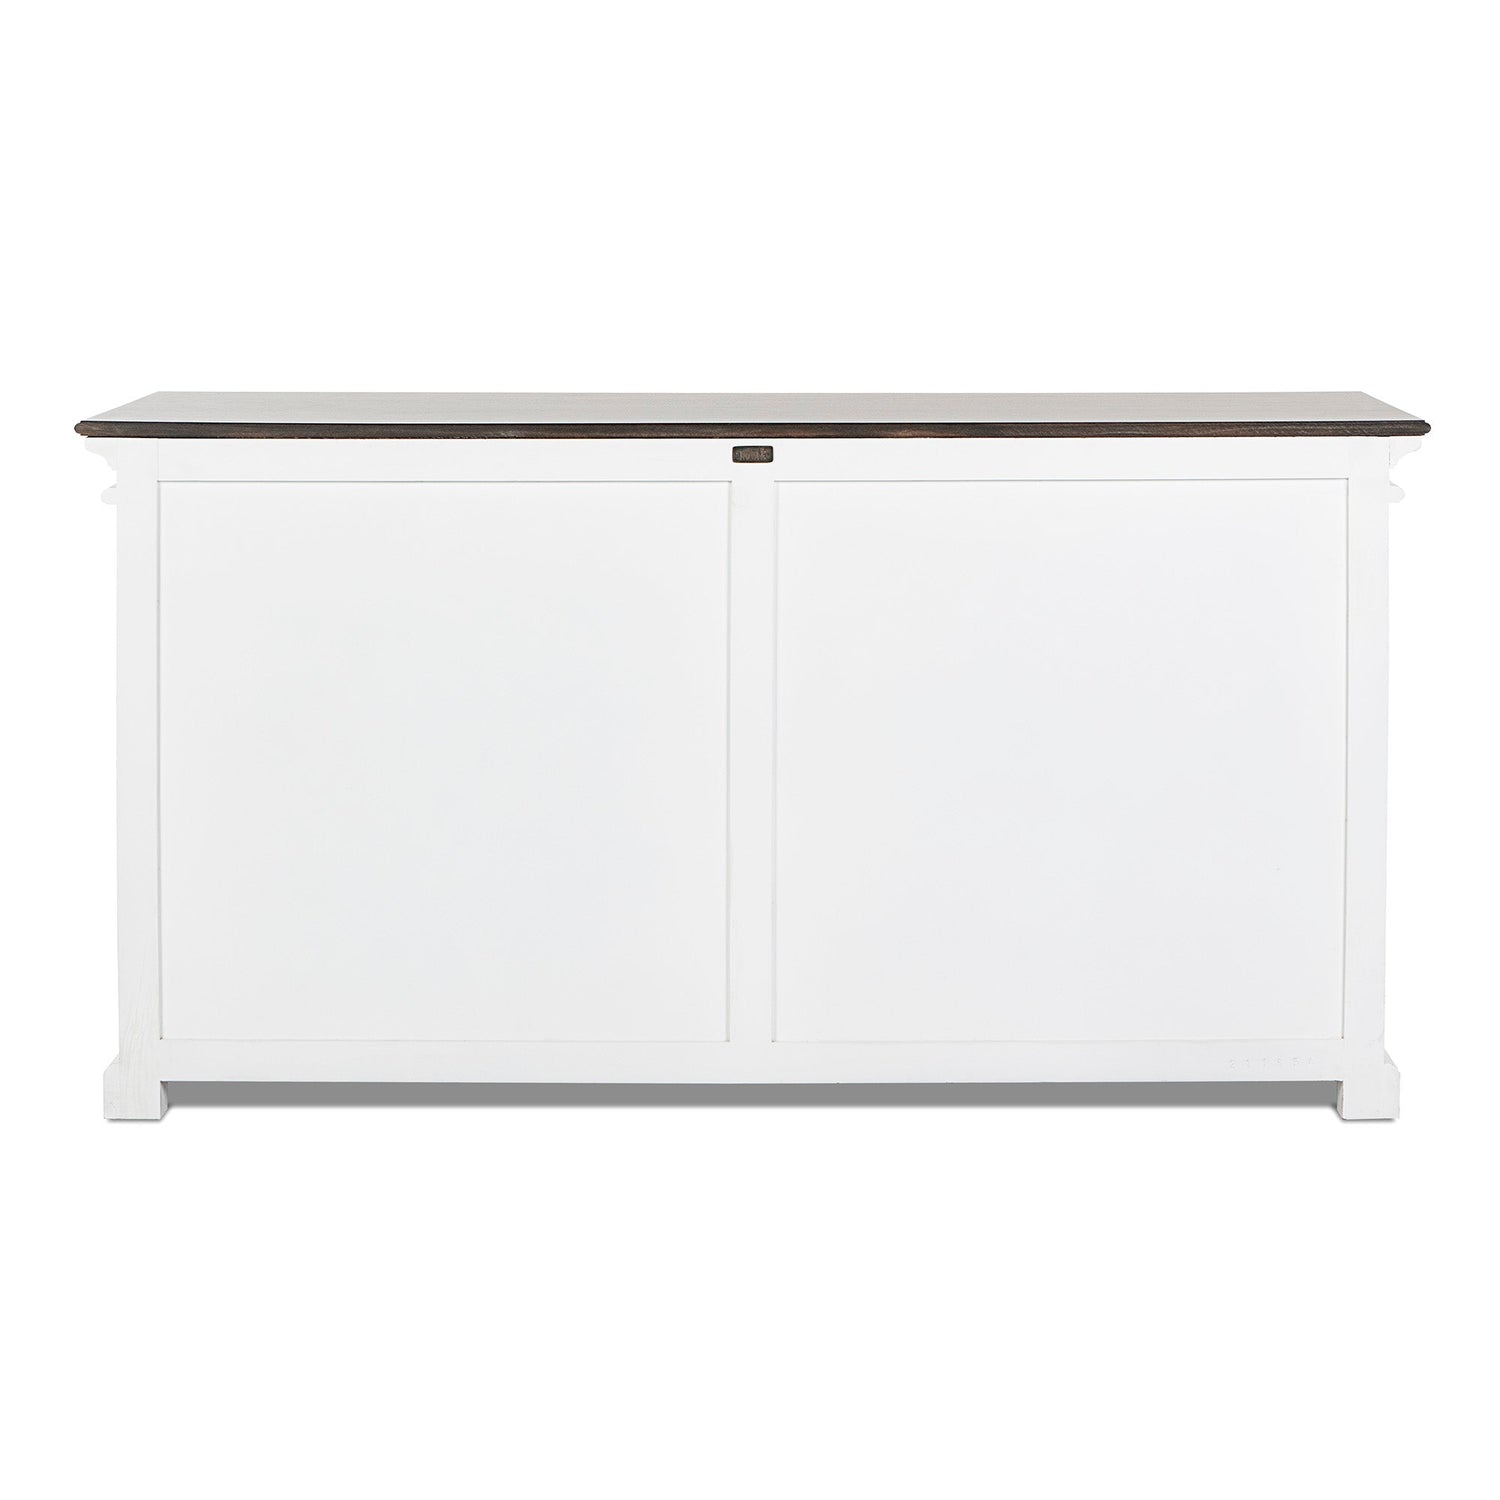 Halifax accent sideboard with 4 glass doors